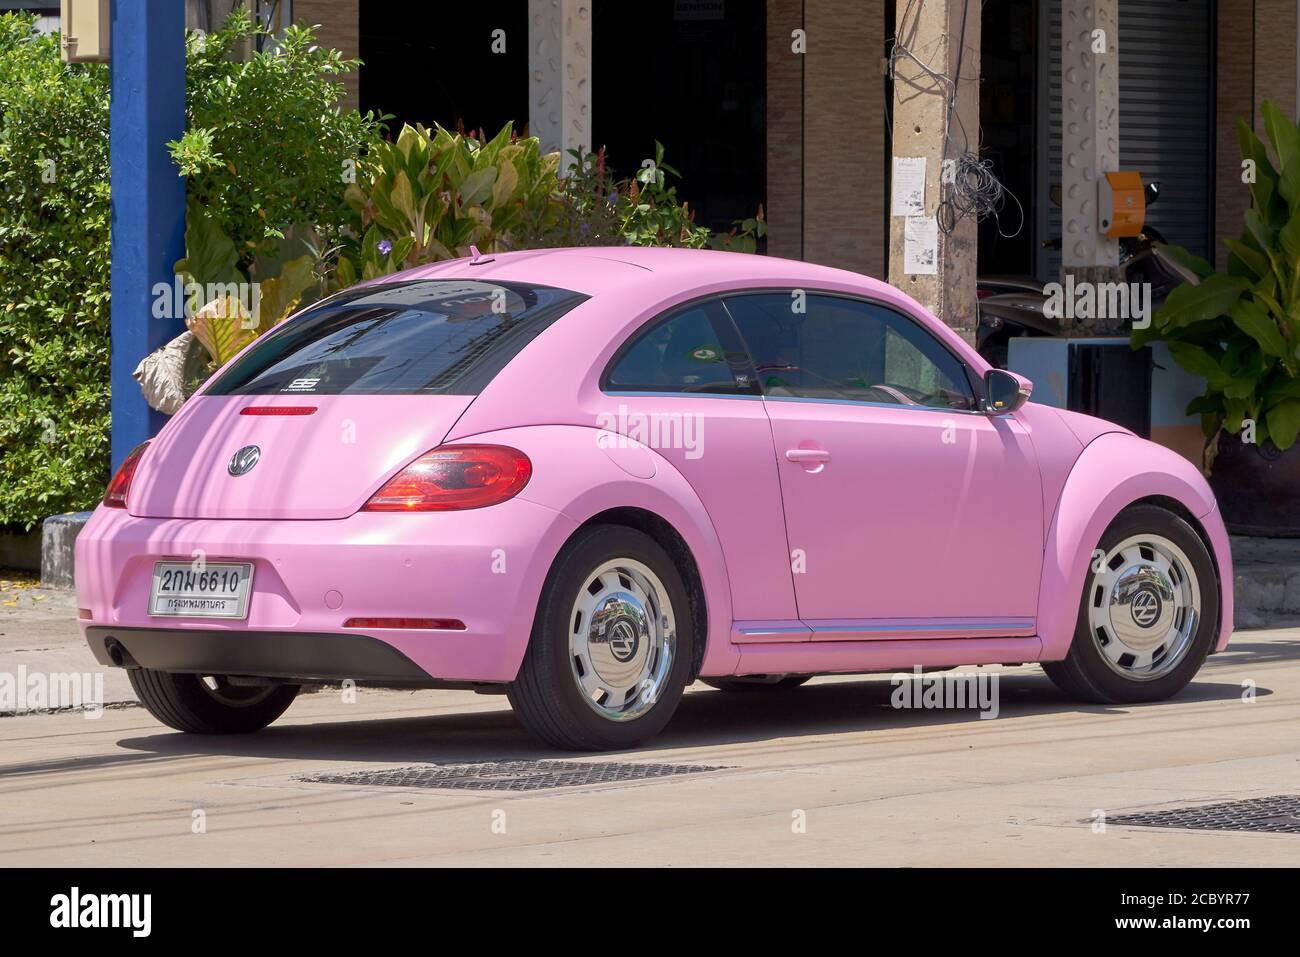 Volkswagen Beetle pink modern VW car. Thailand S. E. Asia. Pink classic car  Stock Photo - Alamy